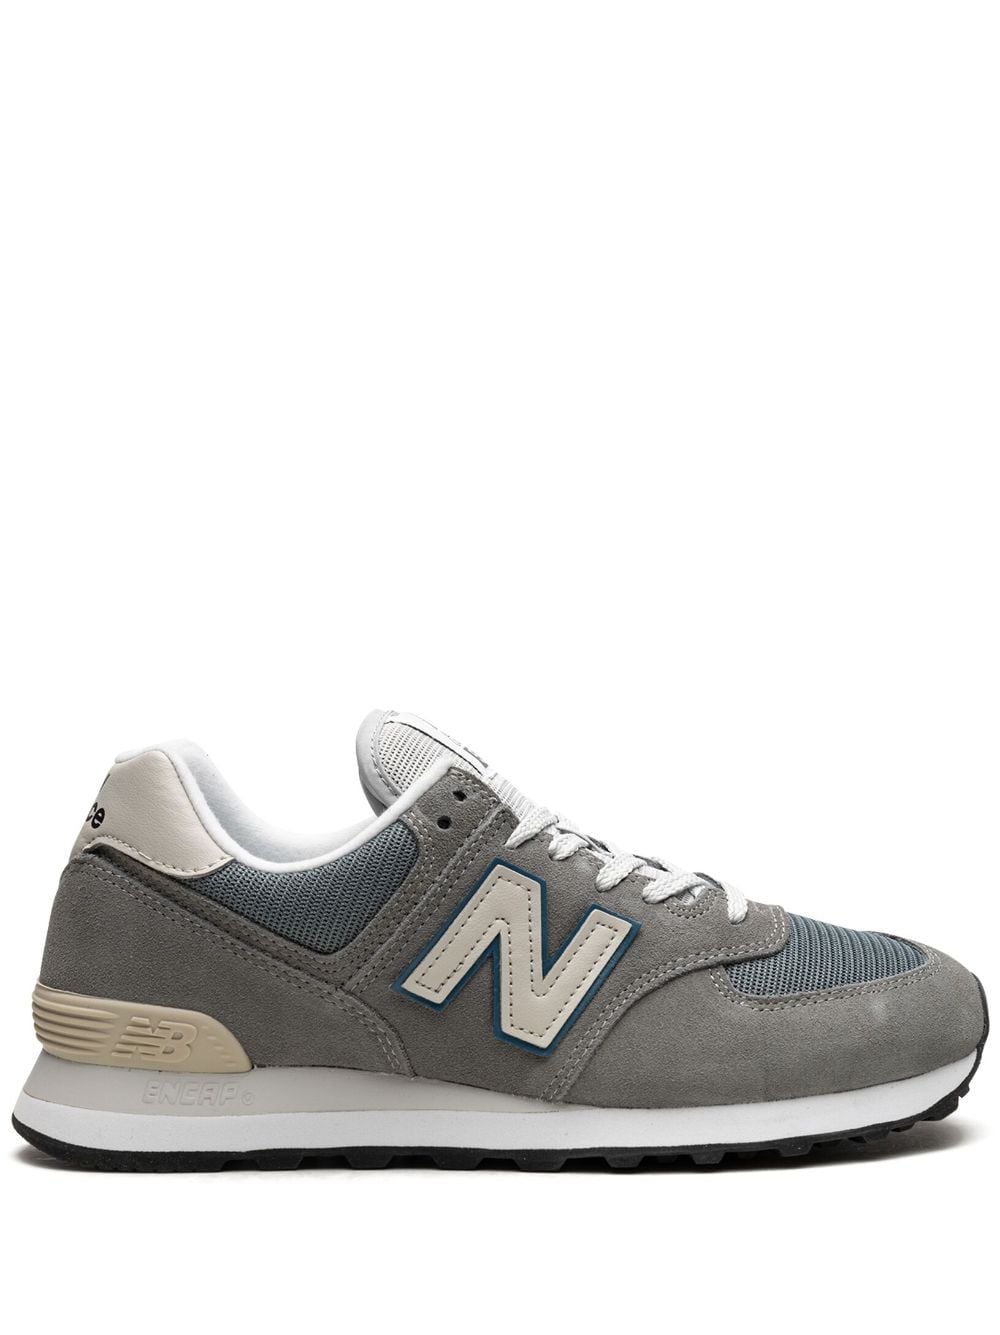 Image 1 of New Balance 574 low-top sneakers